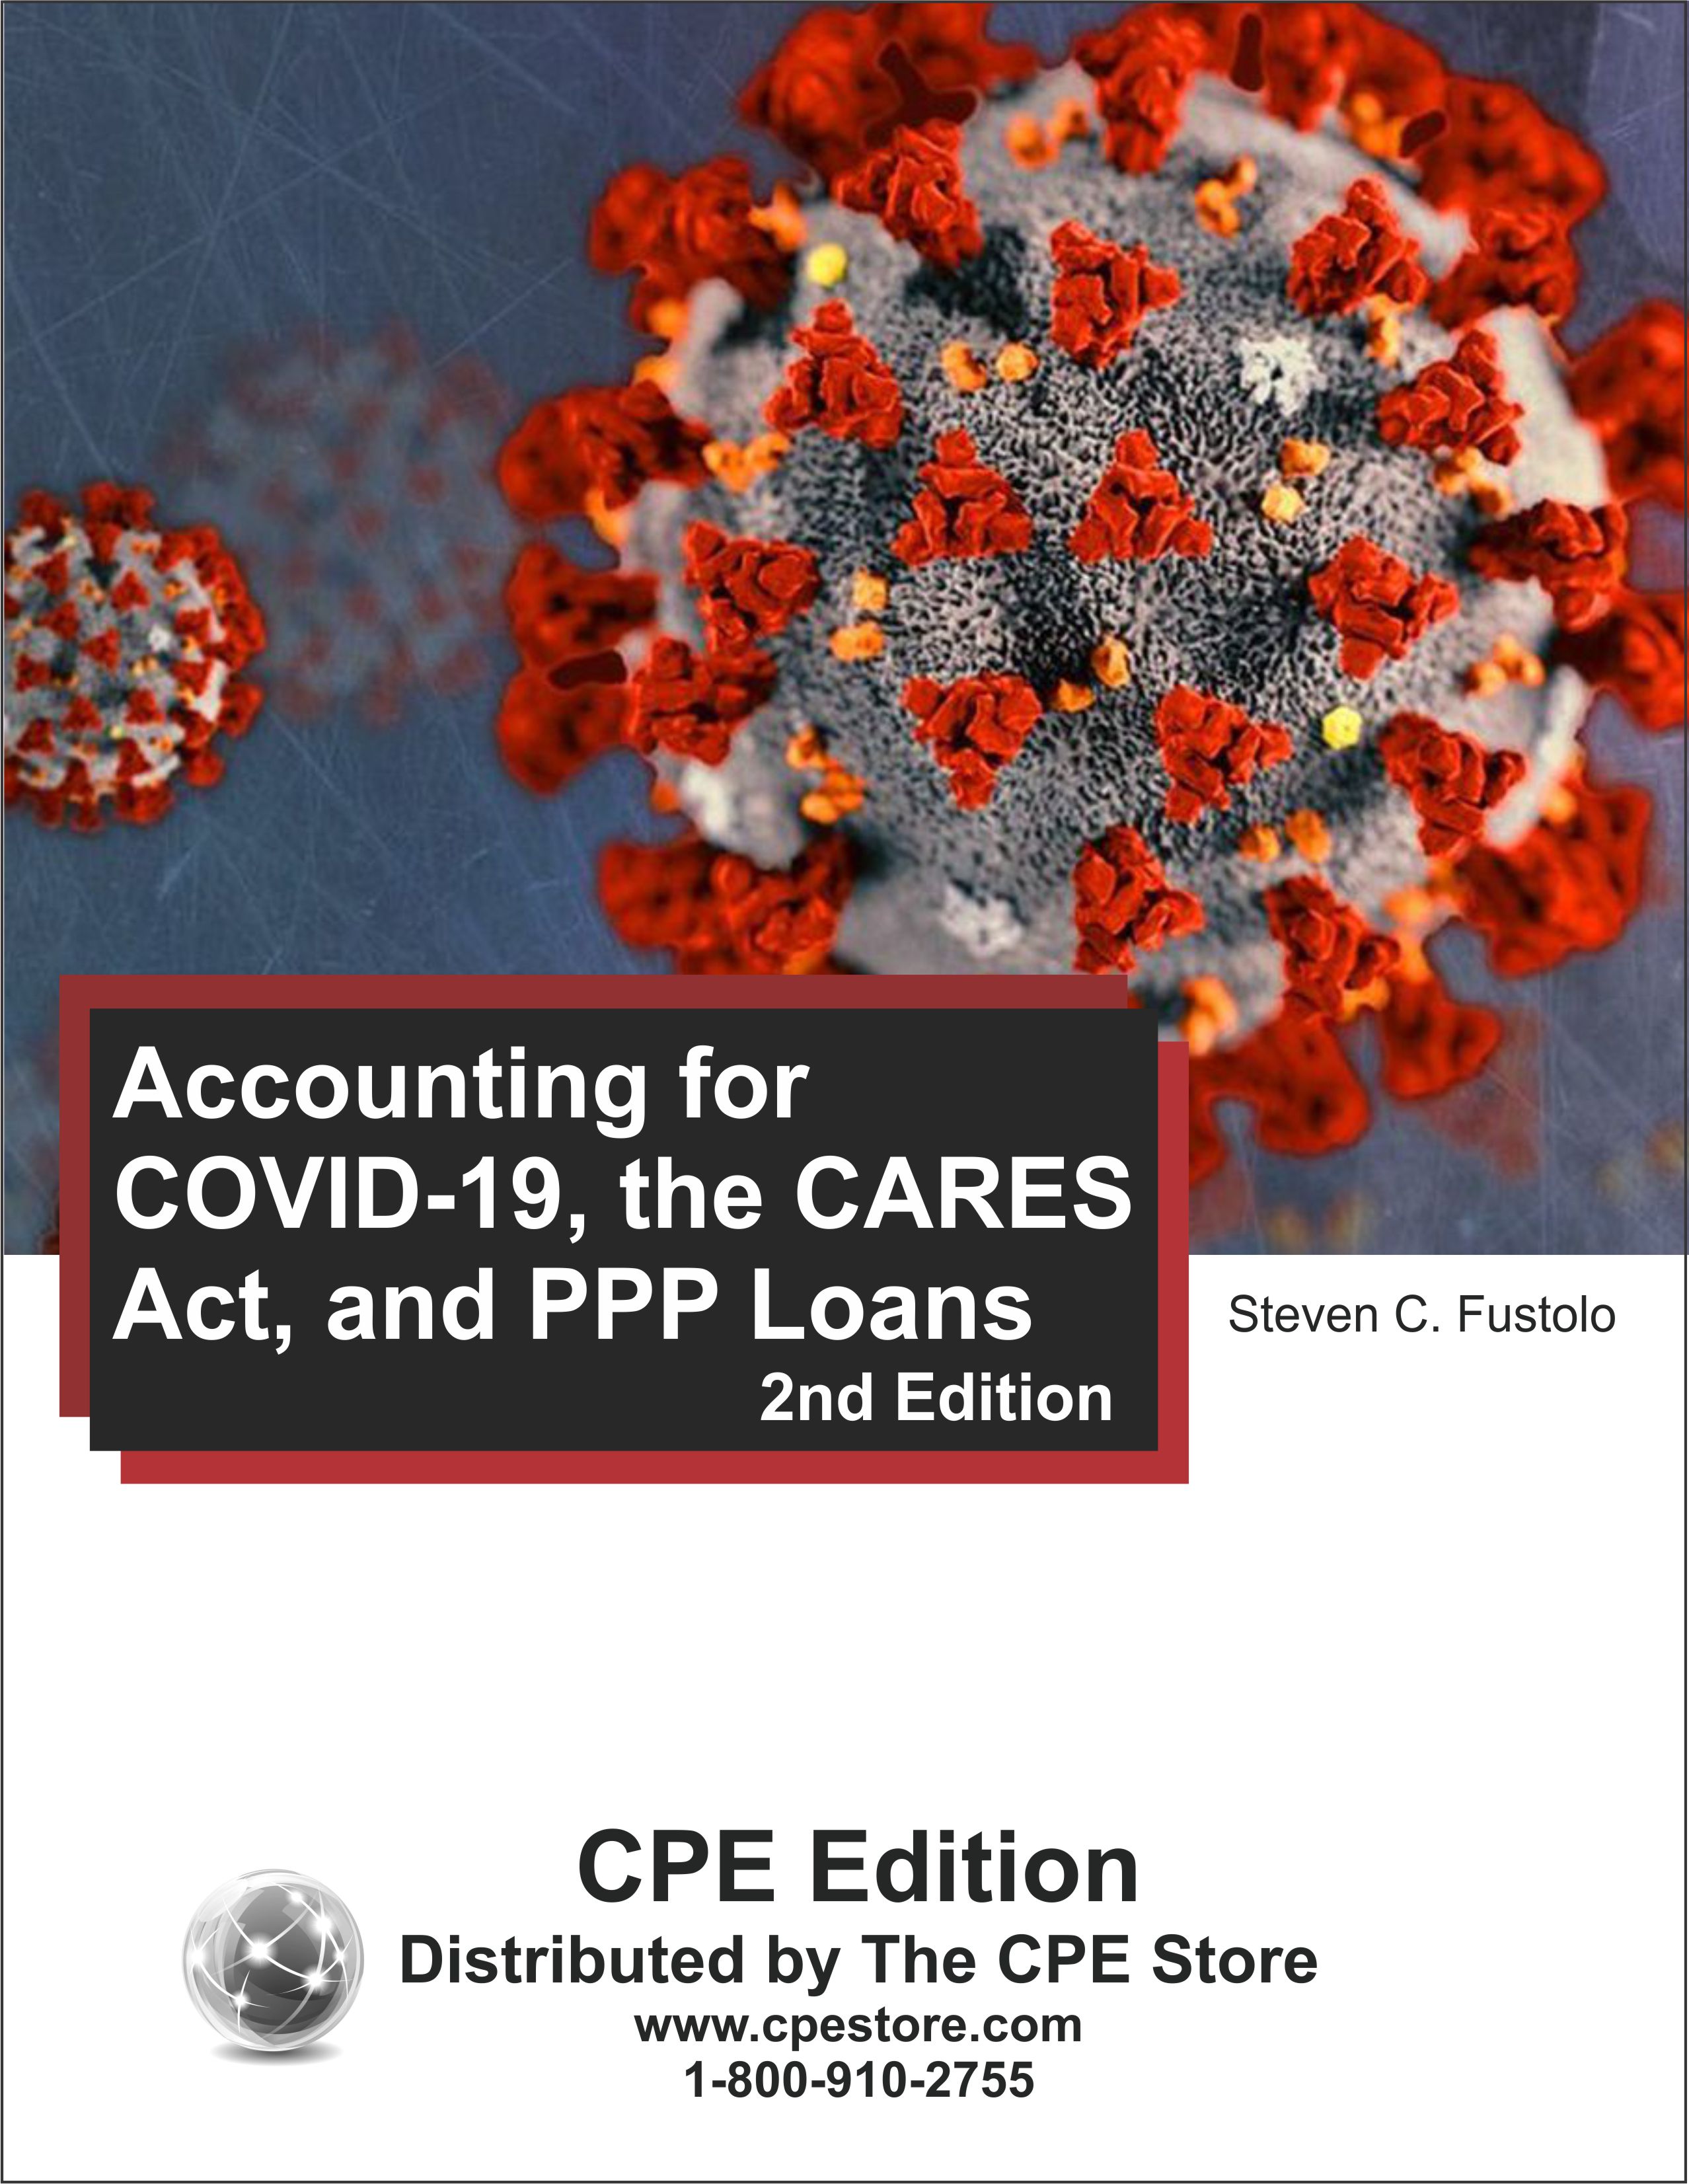 Accounting for COVID-19, the CARES Act, and PPP Loans